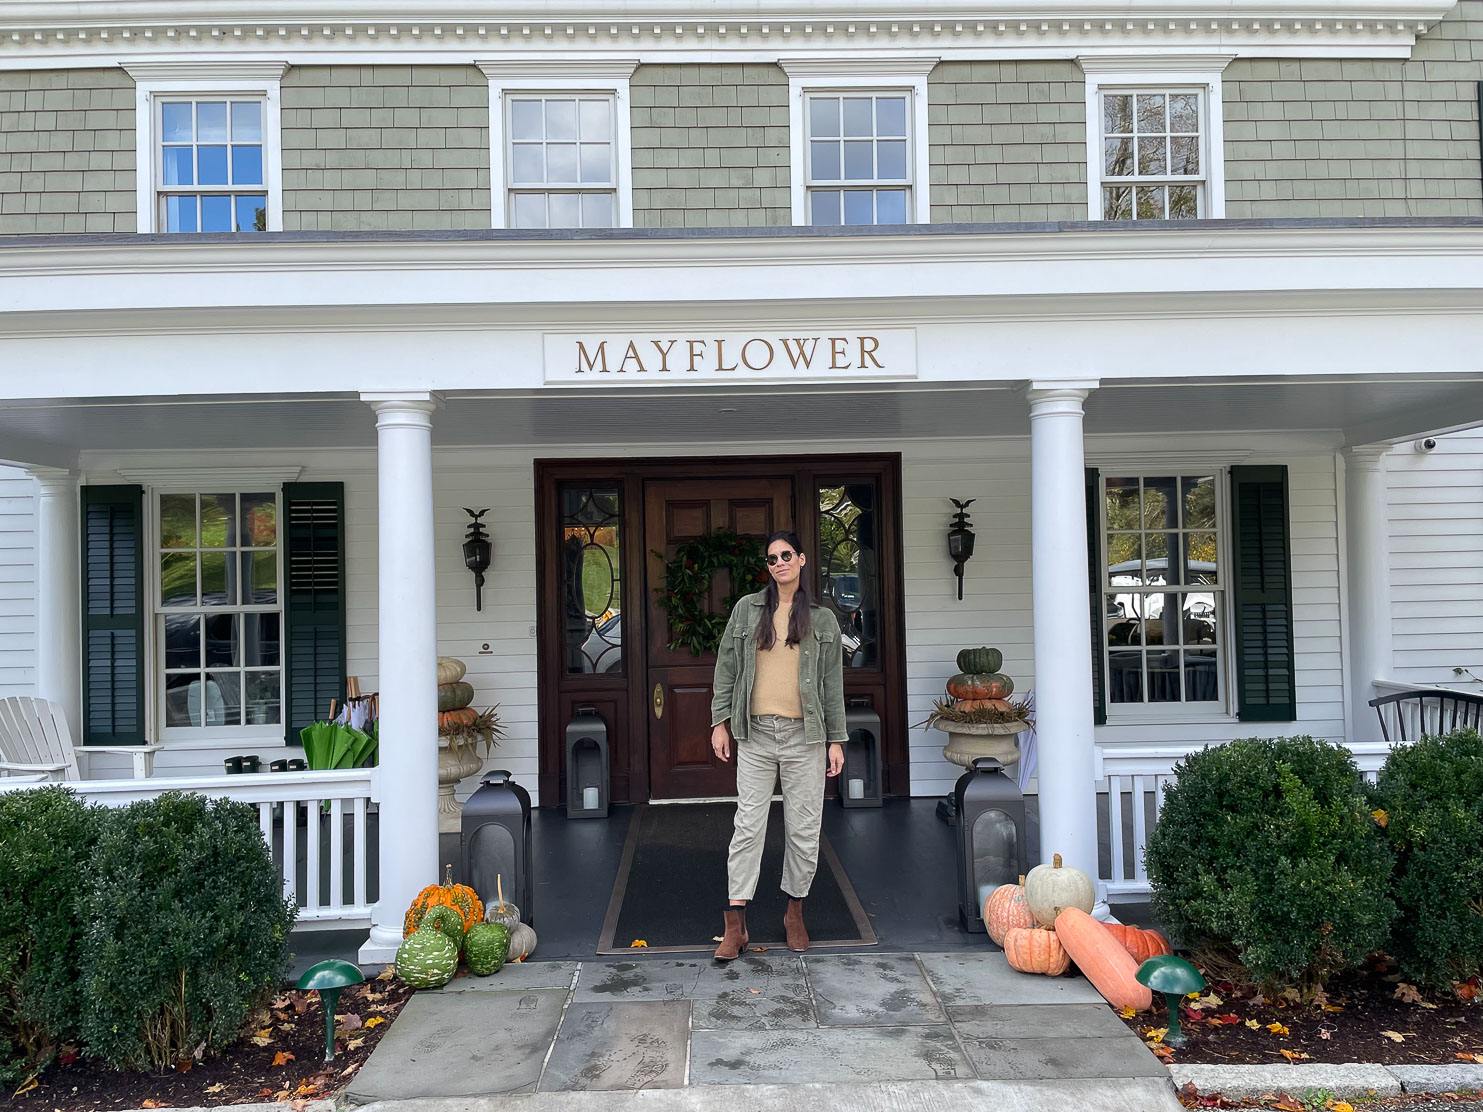 Mayflower Inn & Spa Just me, feeling reluctant to leave after a great weekend